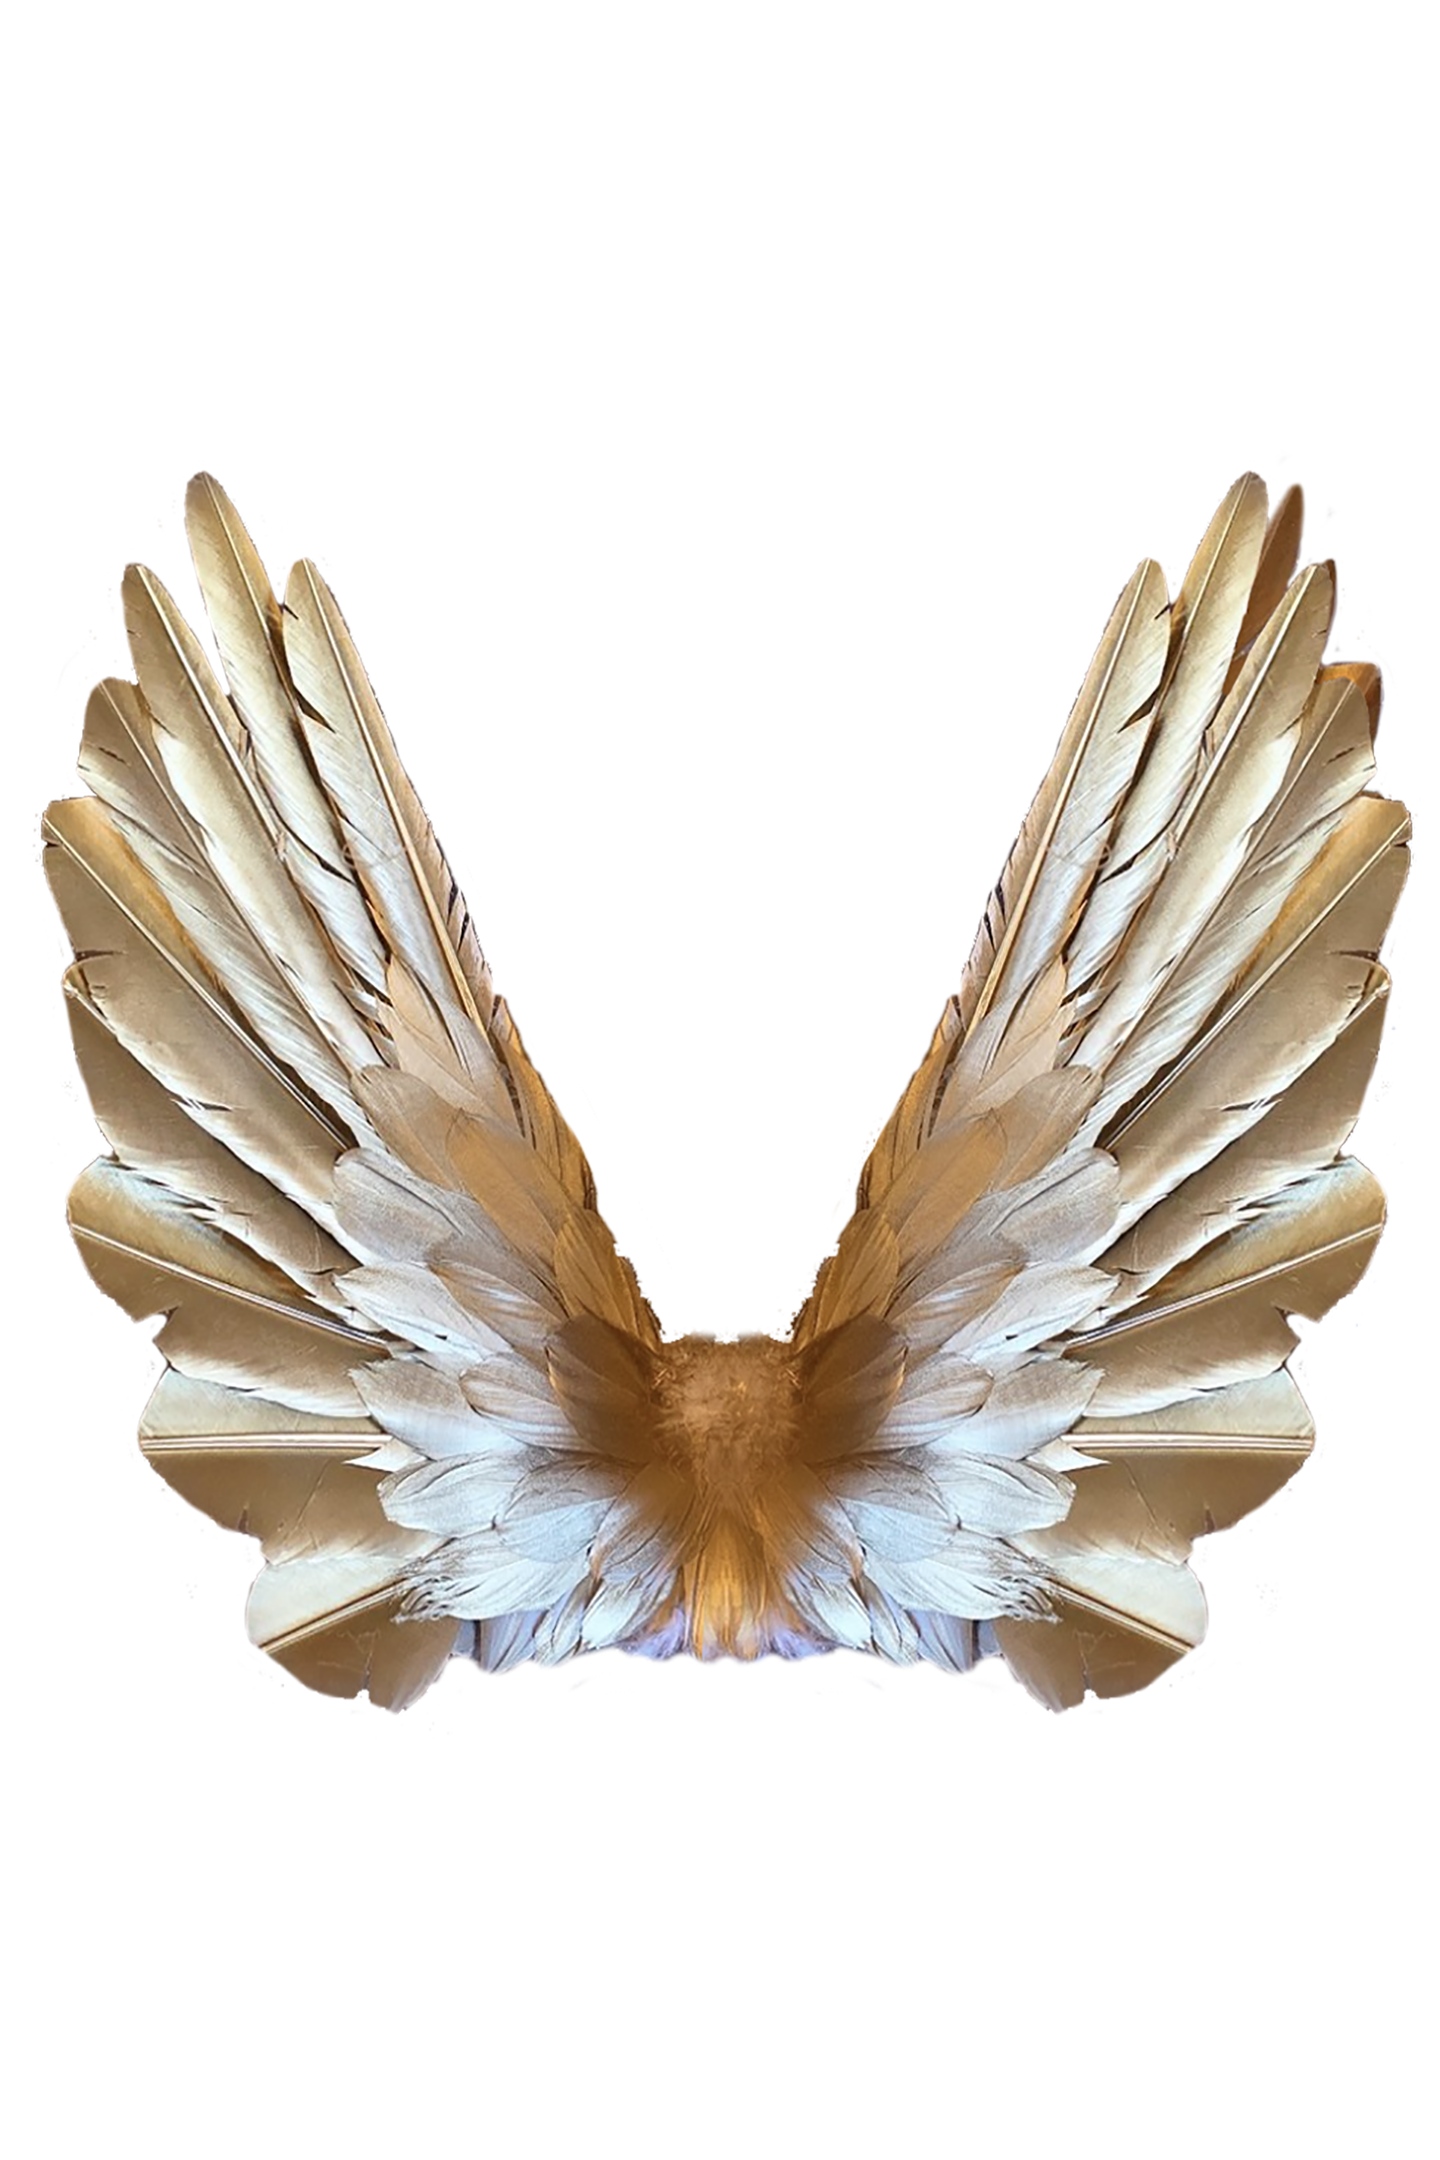 Designer Made Floating Wings in Gold